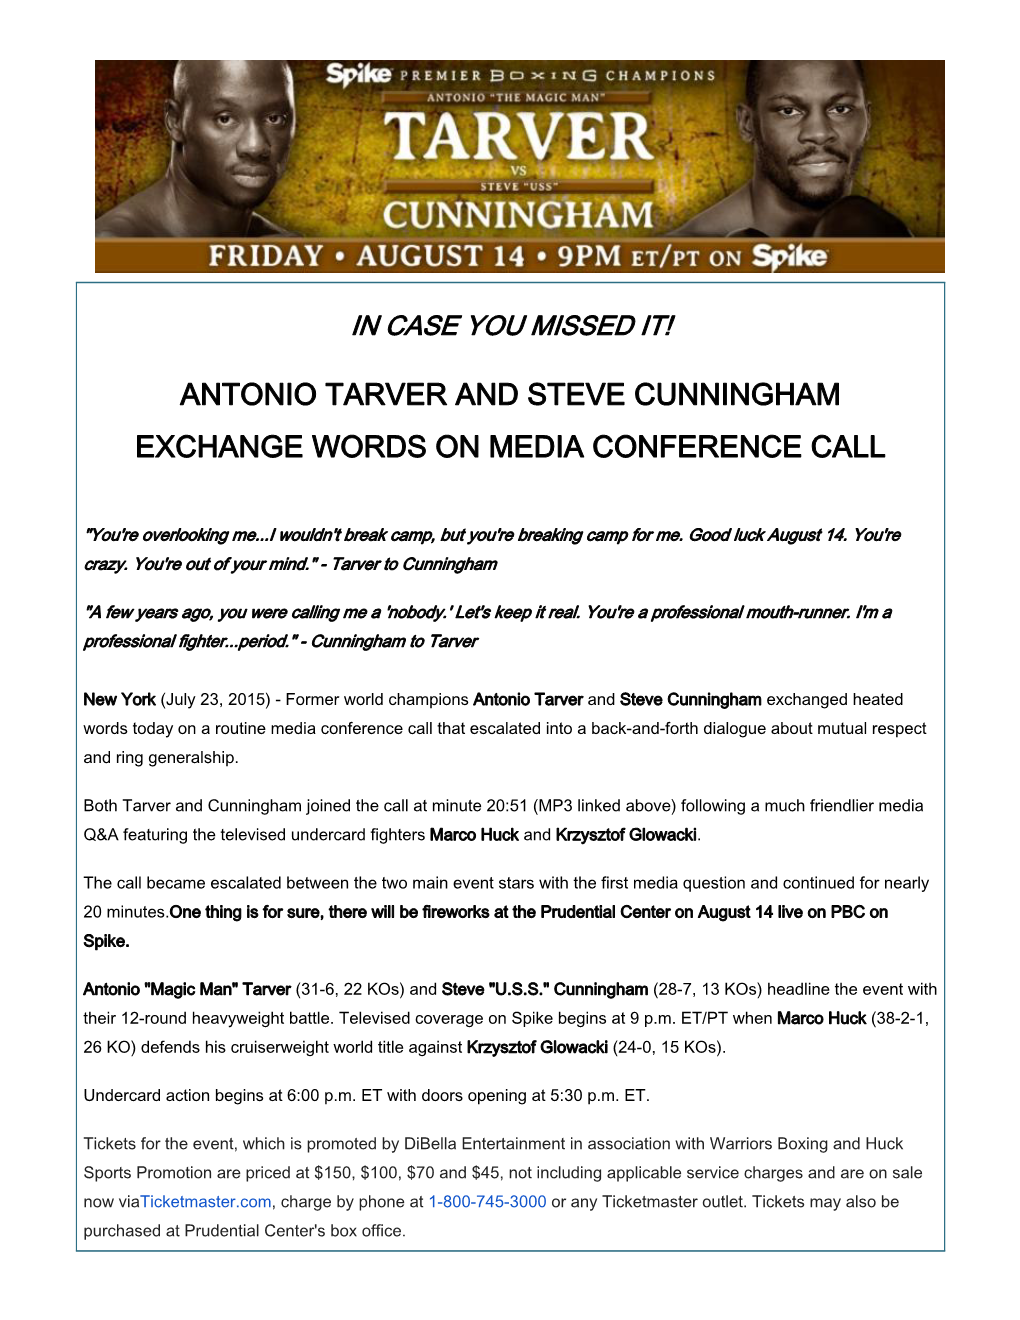 Antonio Tarver and Steve Cunningham Exchange Words on Media Conference Call